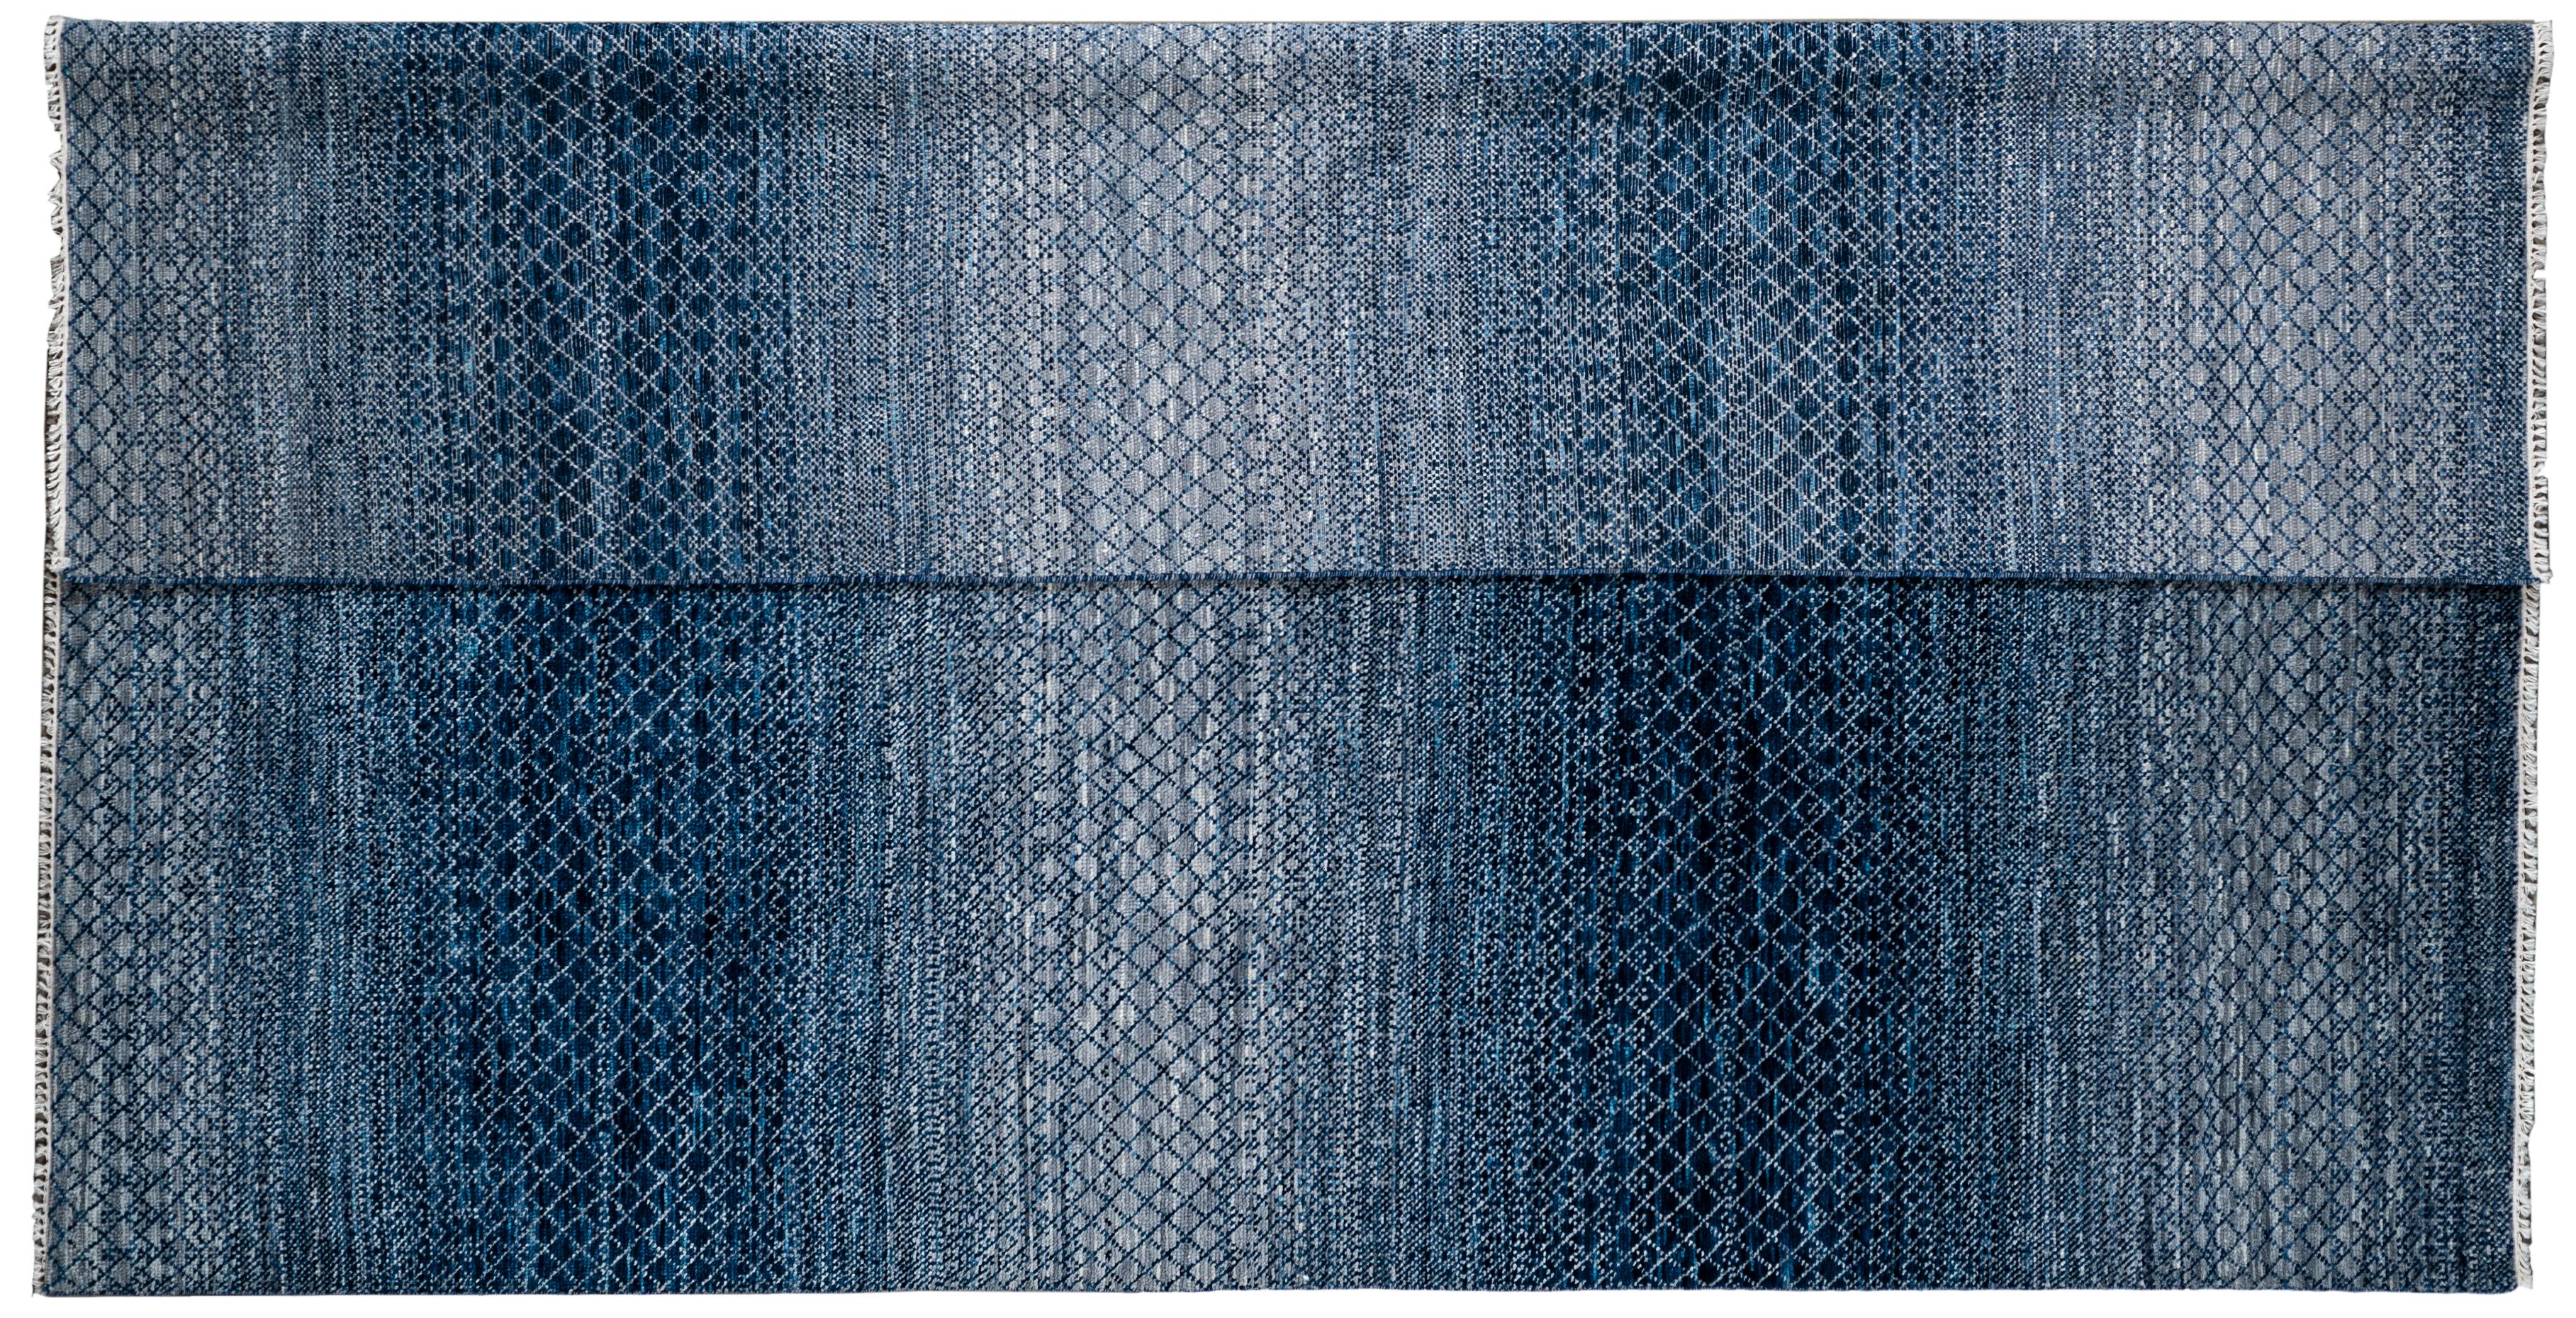 Alternating colors of blue and silver with diamond and wave patterns create a serene yet fun rug that is sure to make any space pop. This modern/contemporary rug is made from all wool fibers that is not only durable and fun to look at but is also